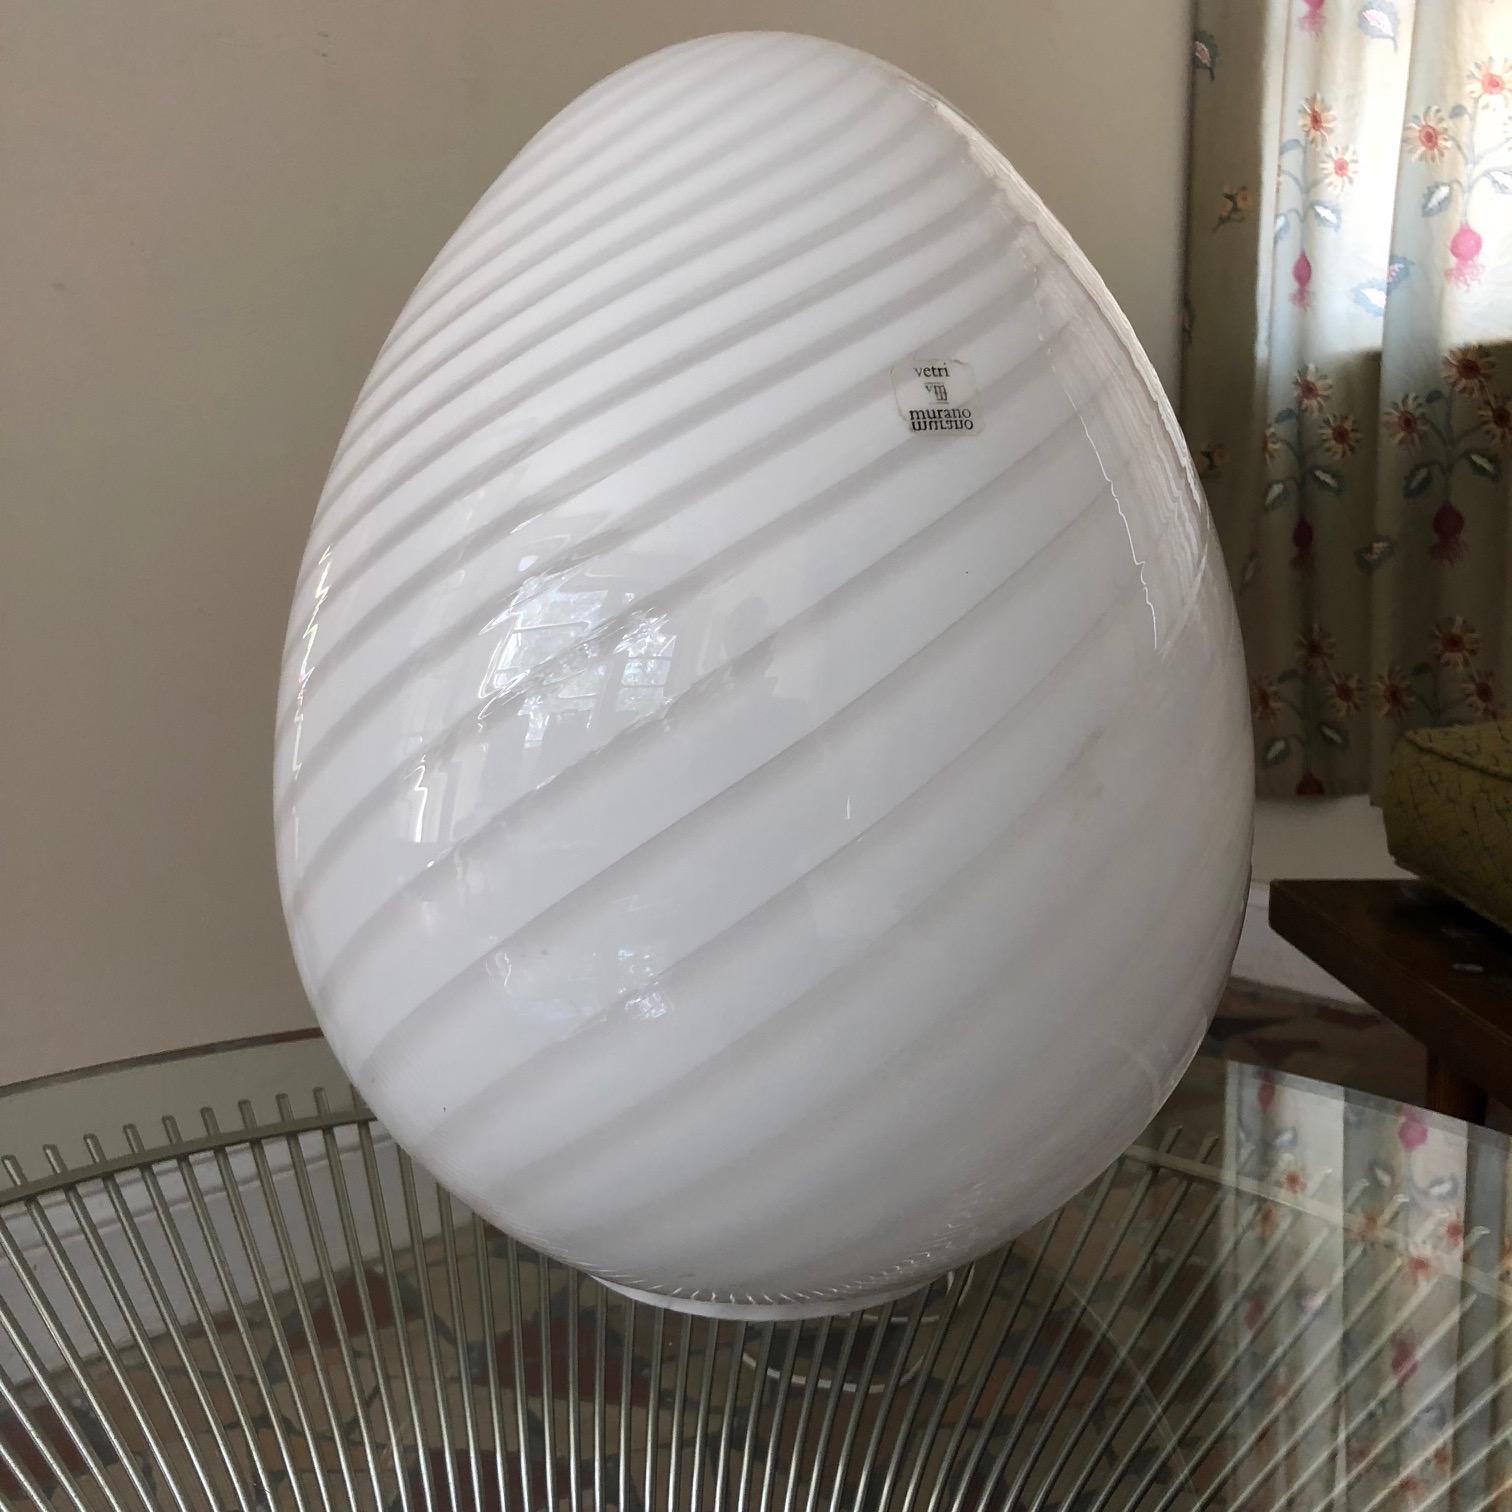 A fun egg lamp, signed Vetri Murano, circa 1980s. Cased glass with a Classic swirl pattern. This is a big egg at 17